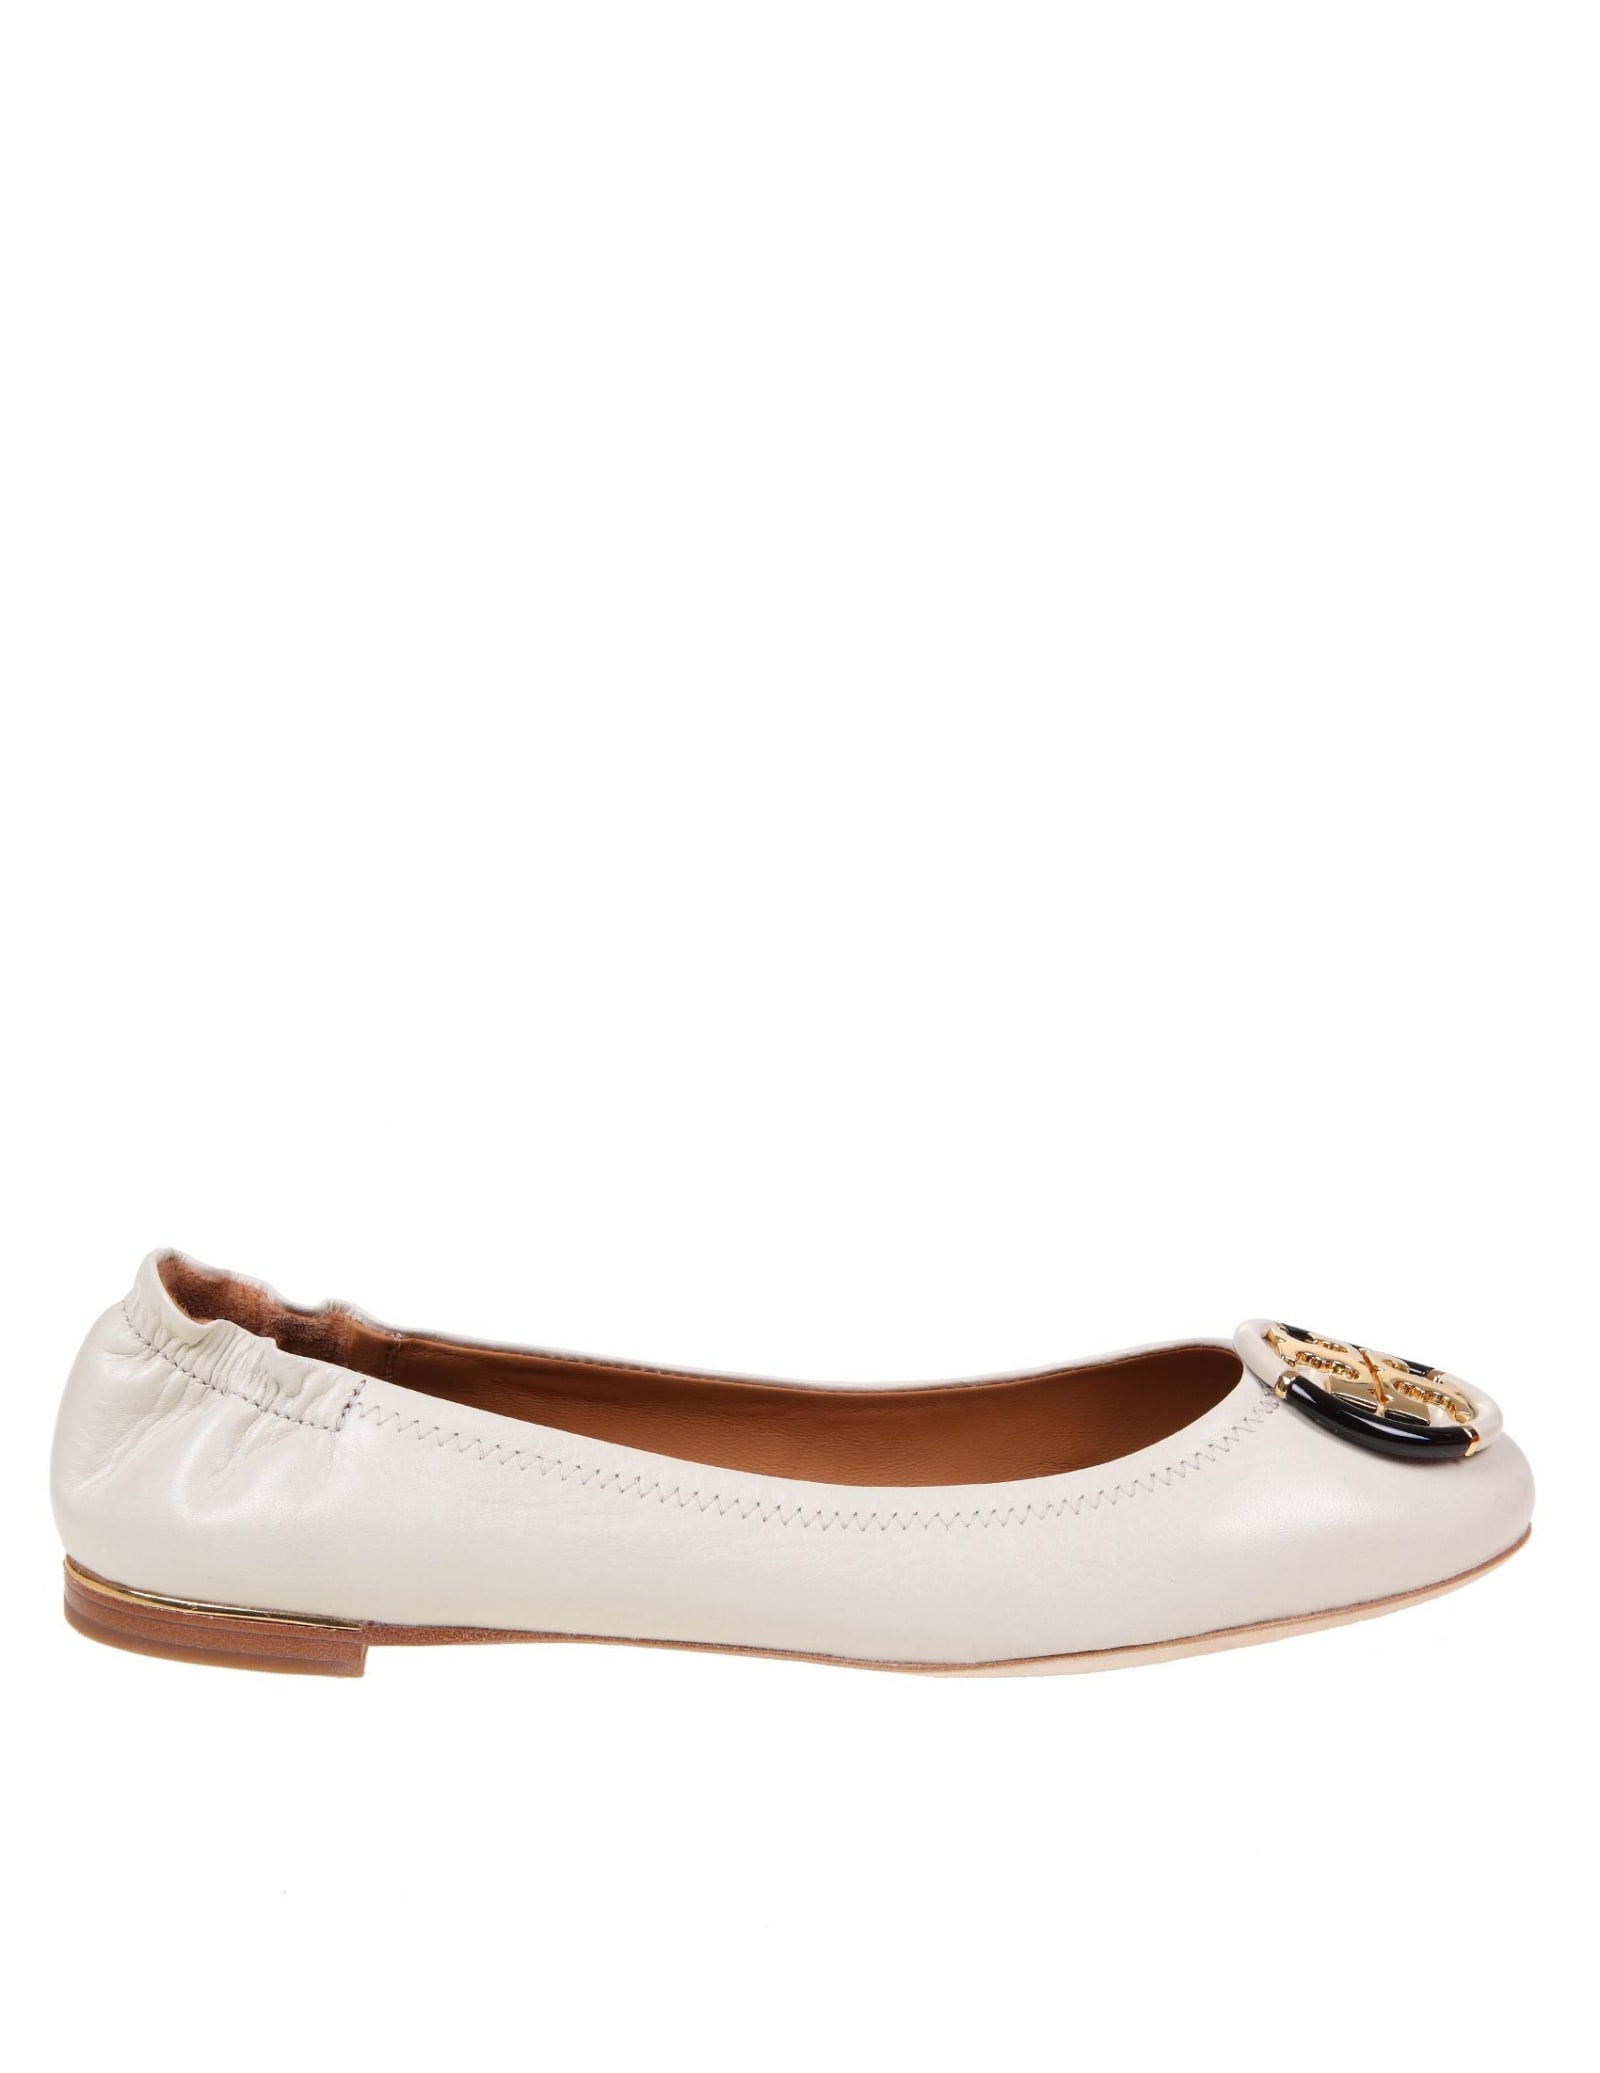 Tory Burch Ballerina Multi Logo In Ivory Color Leather